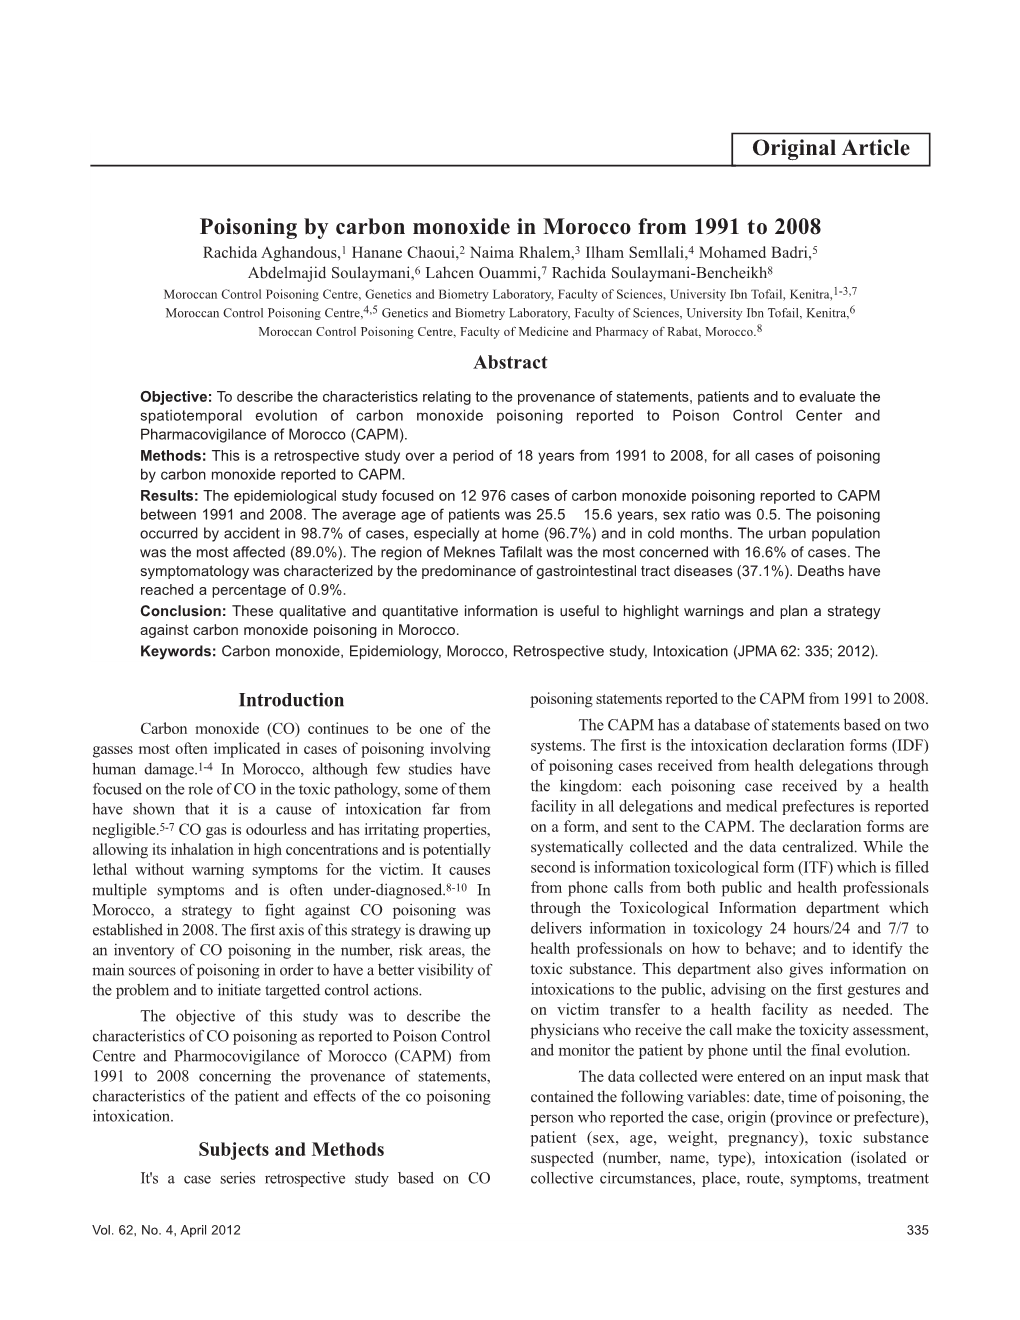 Poisoning by Carbon Monoxide in Morocco from 1991 to 2008 Original